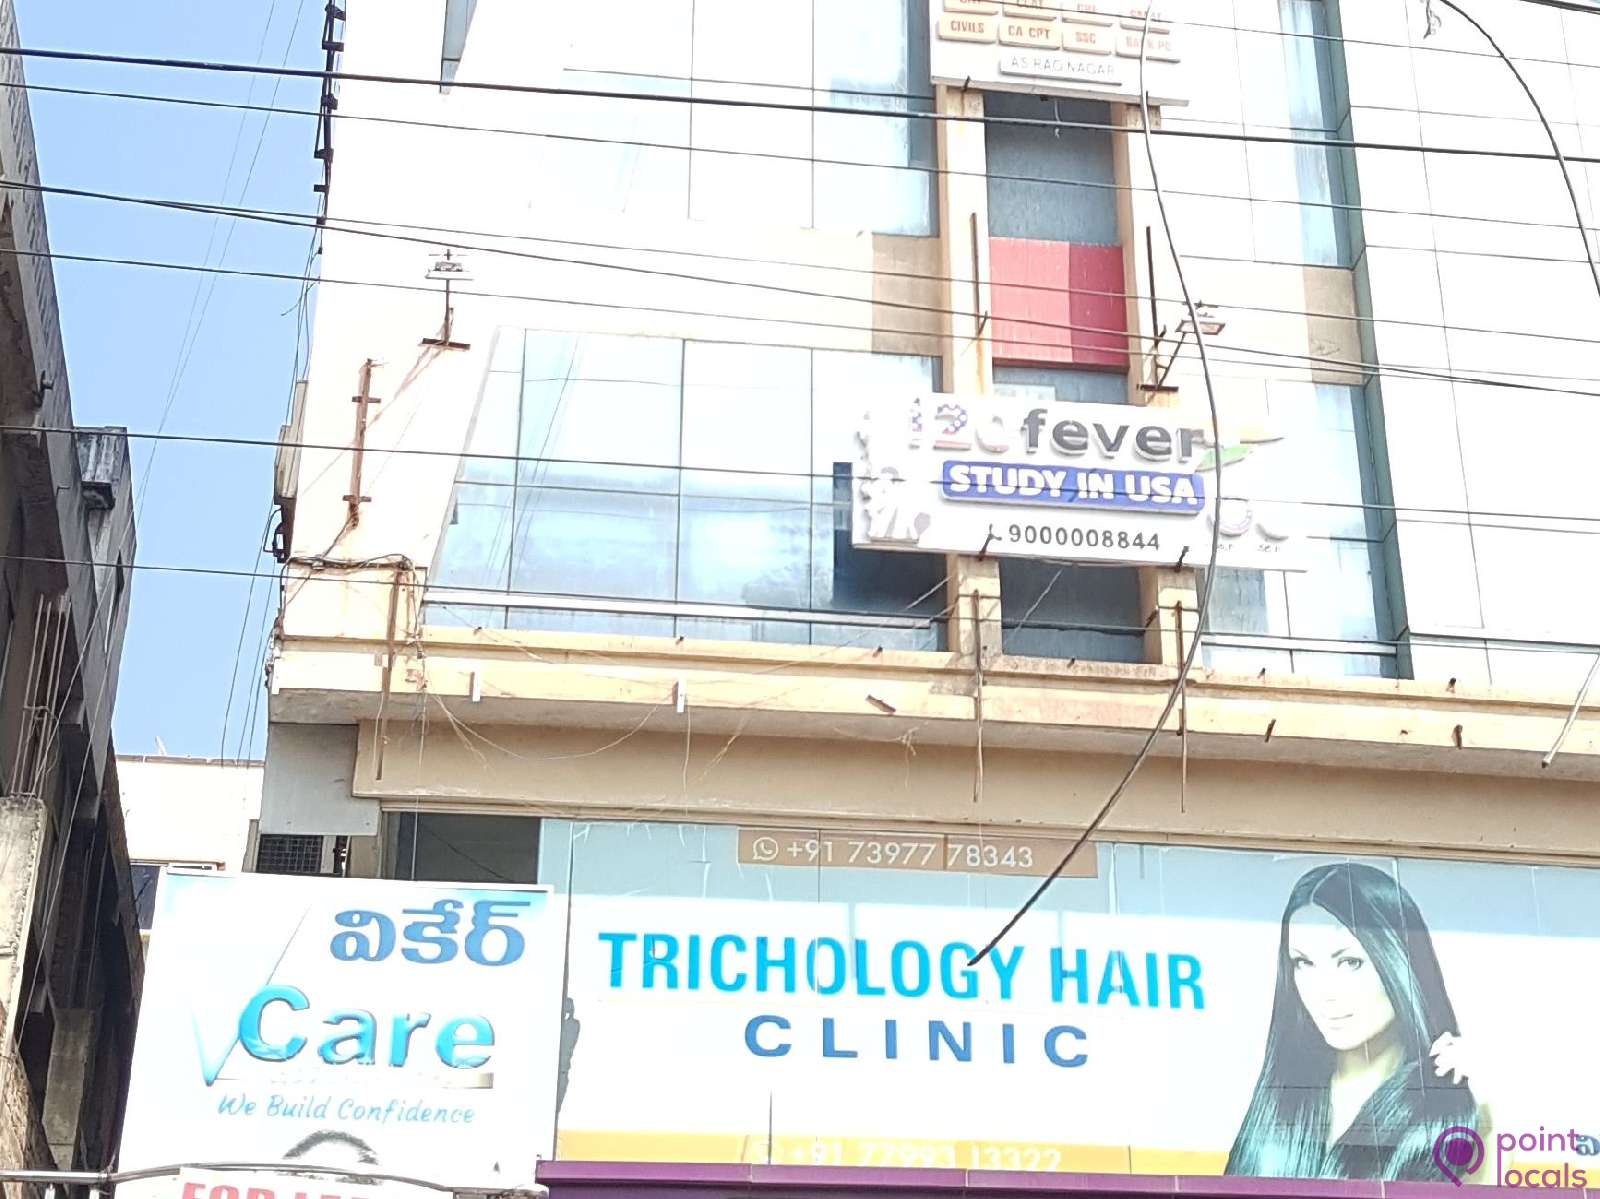 V care - Trichology Hair Clinic - Trichologist in Secunderabad,Telangana |  Pointlocals